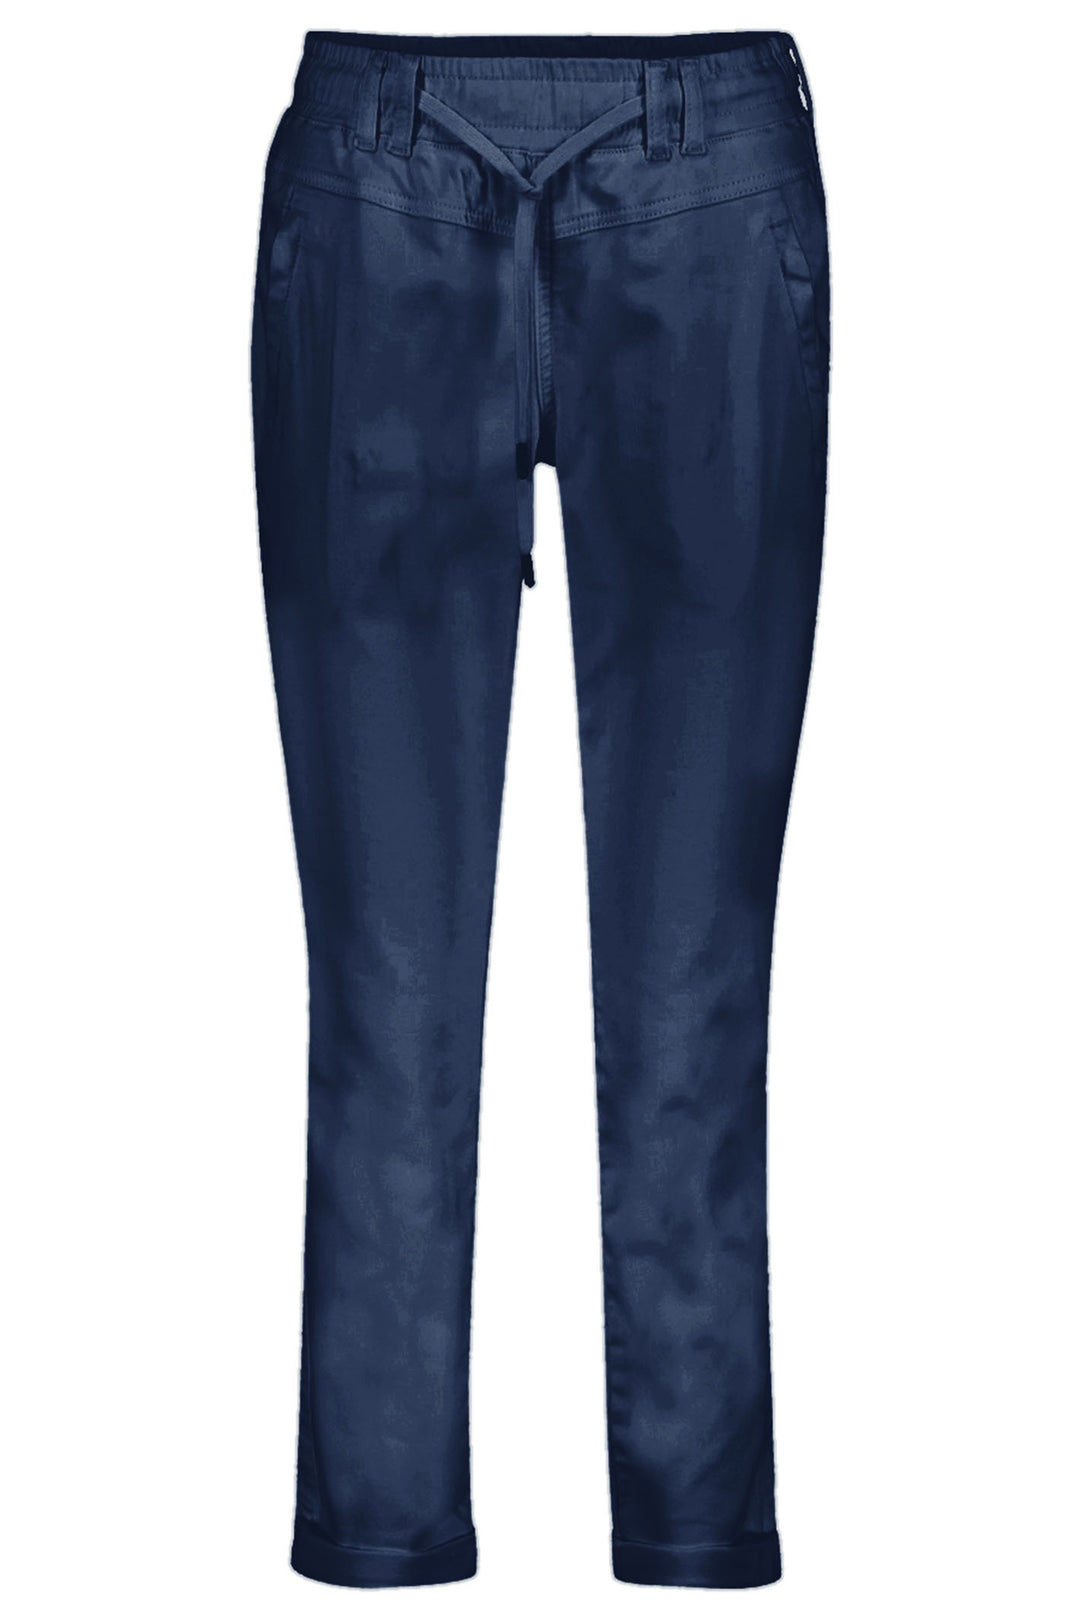 Red Button SRB4154 Tessy Navy Cropped Jogger Trousers